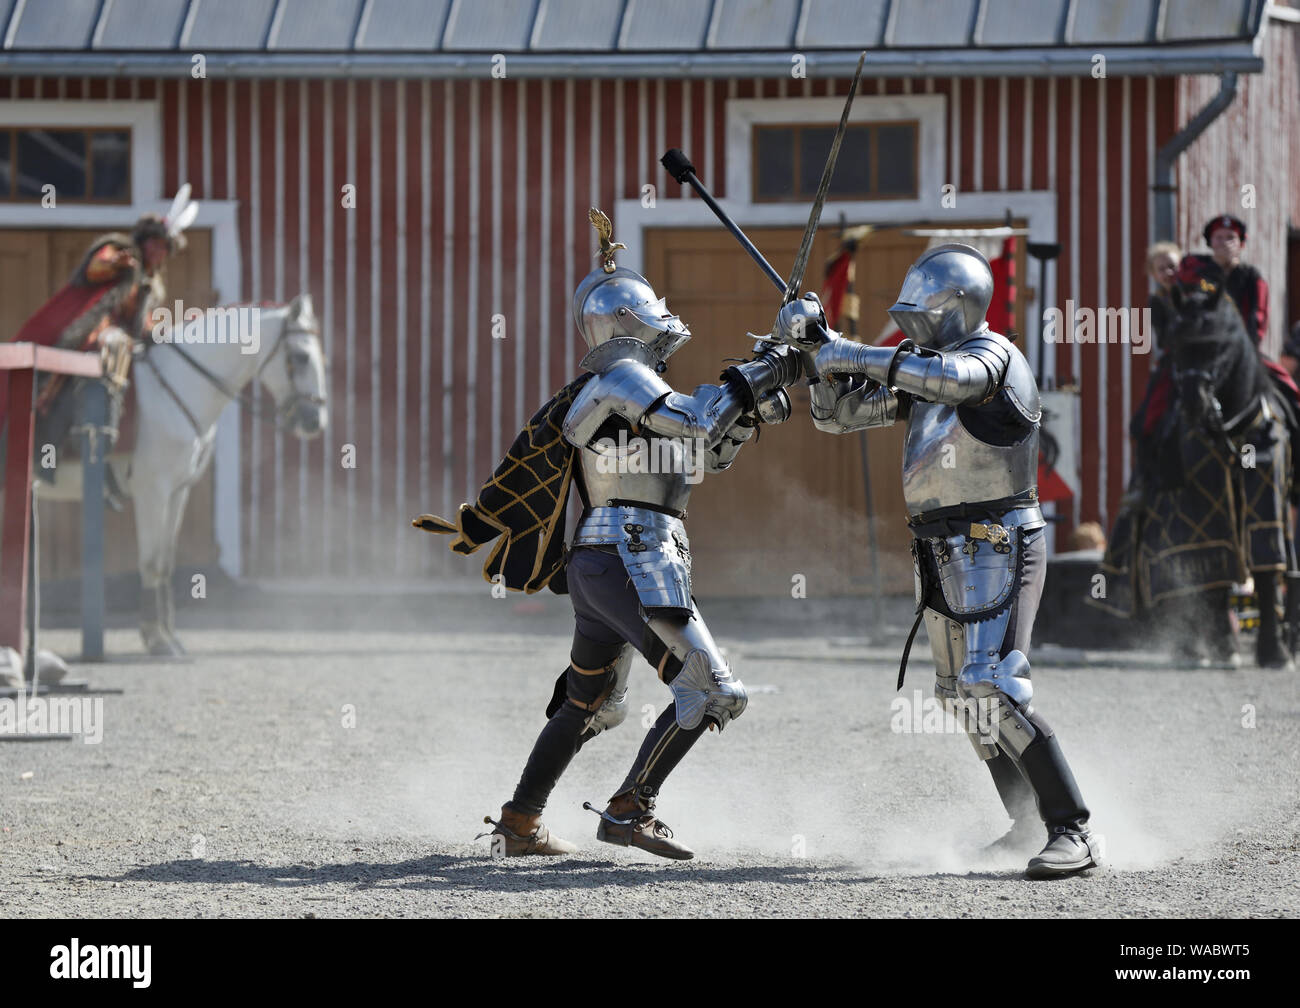 Hameenlinna Finland 08/17/2019 Medieval festival with craftsman, knights and entertainers. Two knights in harness fighting on a dusty field. Stock Photo